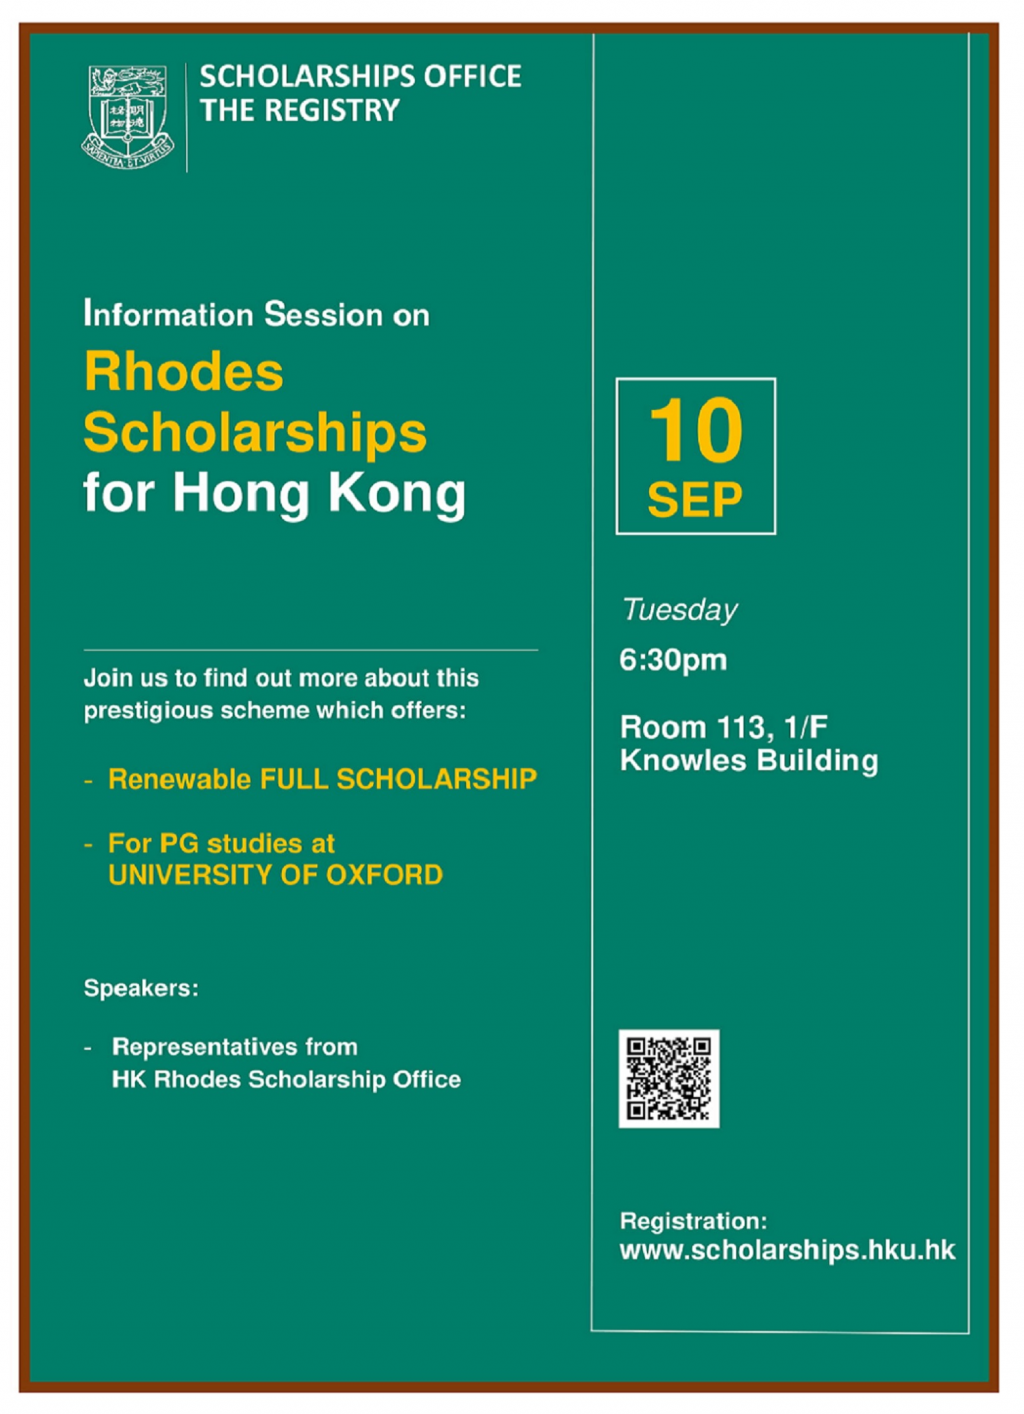 Rhodes Scholarship for Hong Kong 2020 - Info Session